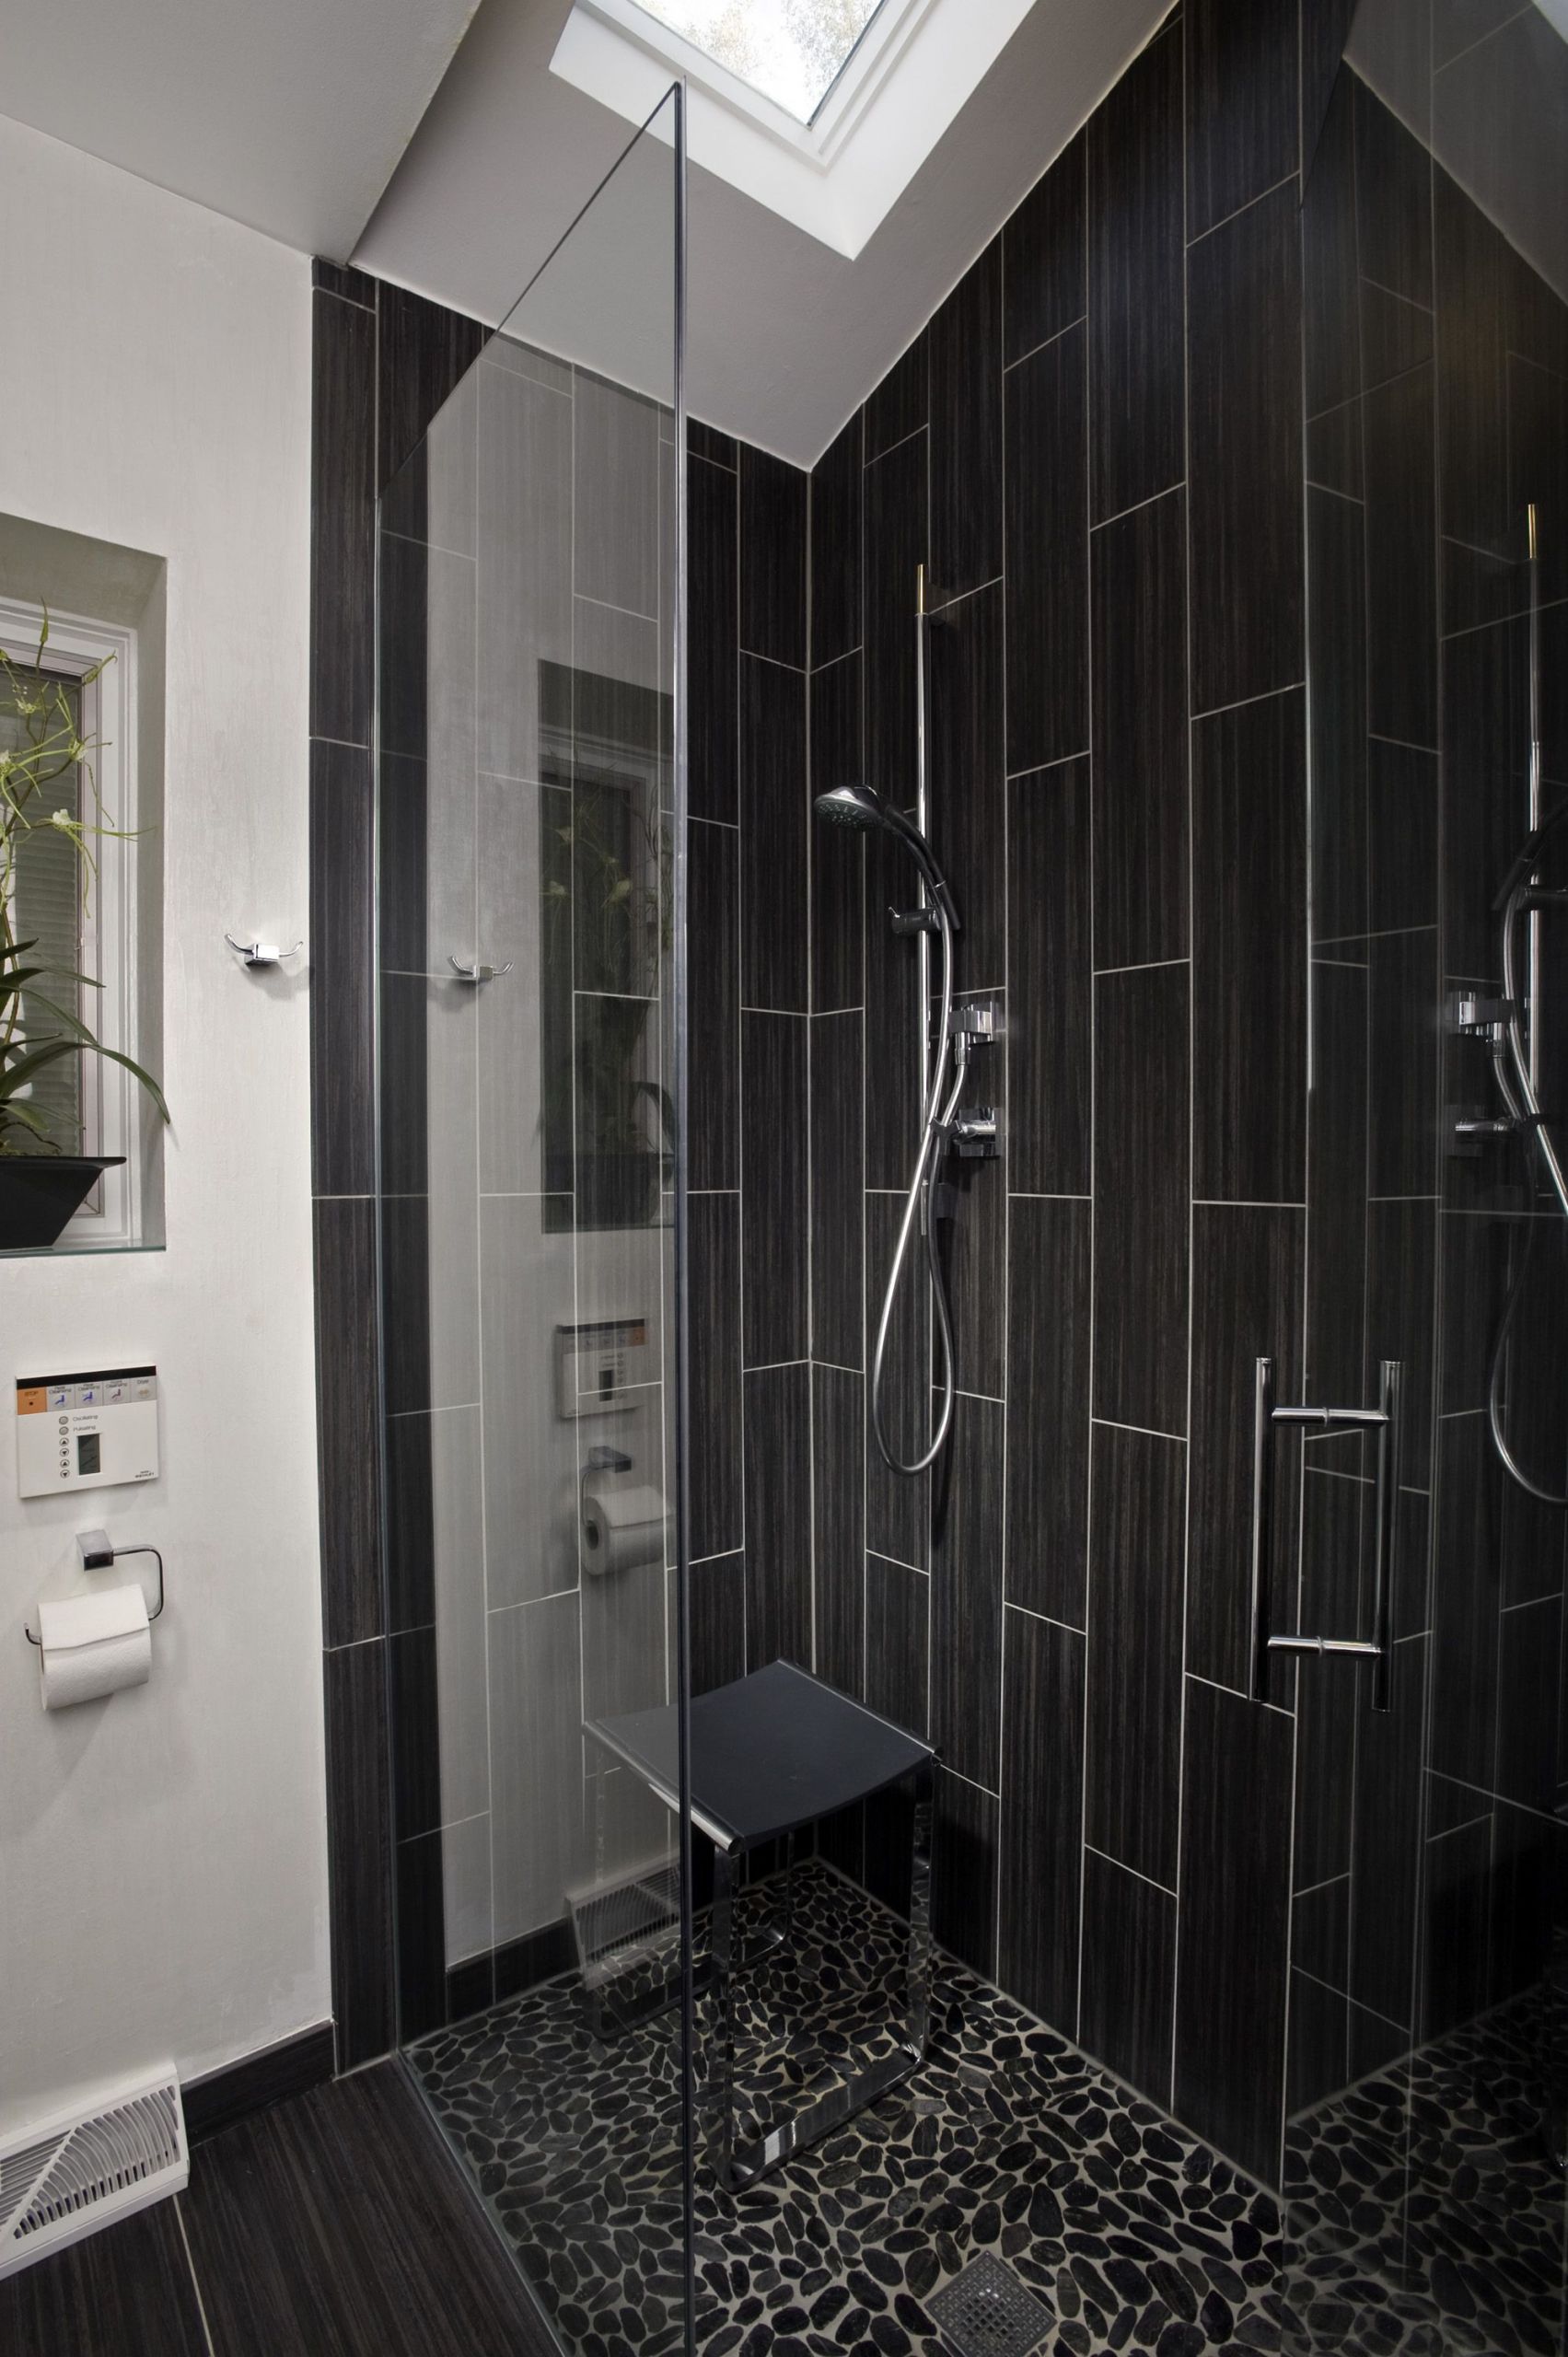 Bathroom Ceramic Tile Ideas
 Tile Shower Ideas Affecting the Appearance of the Space